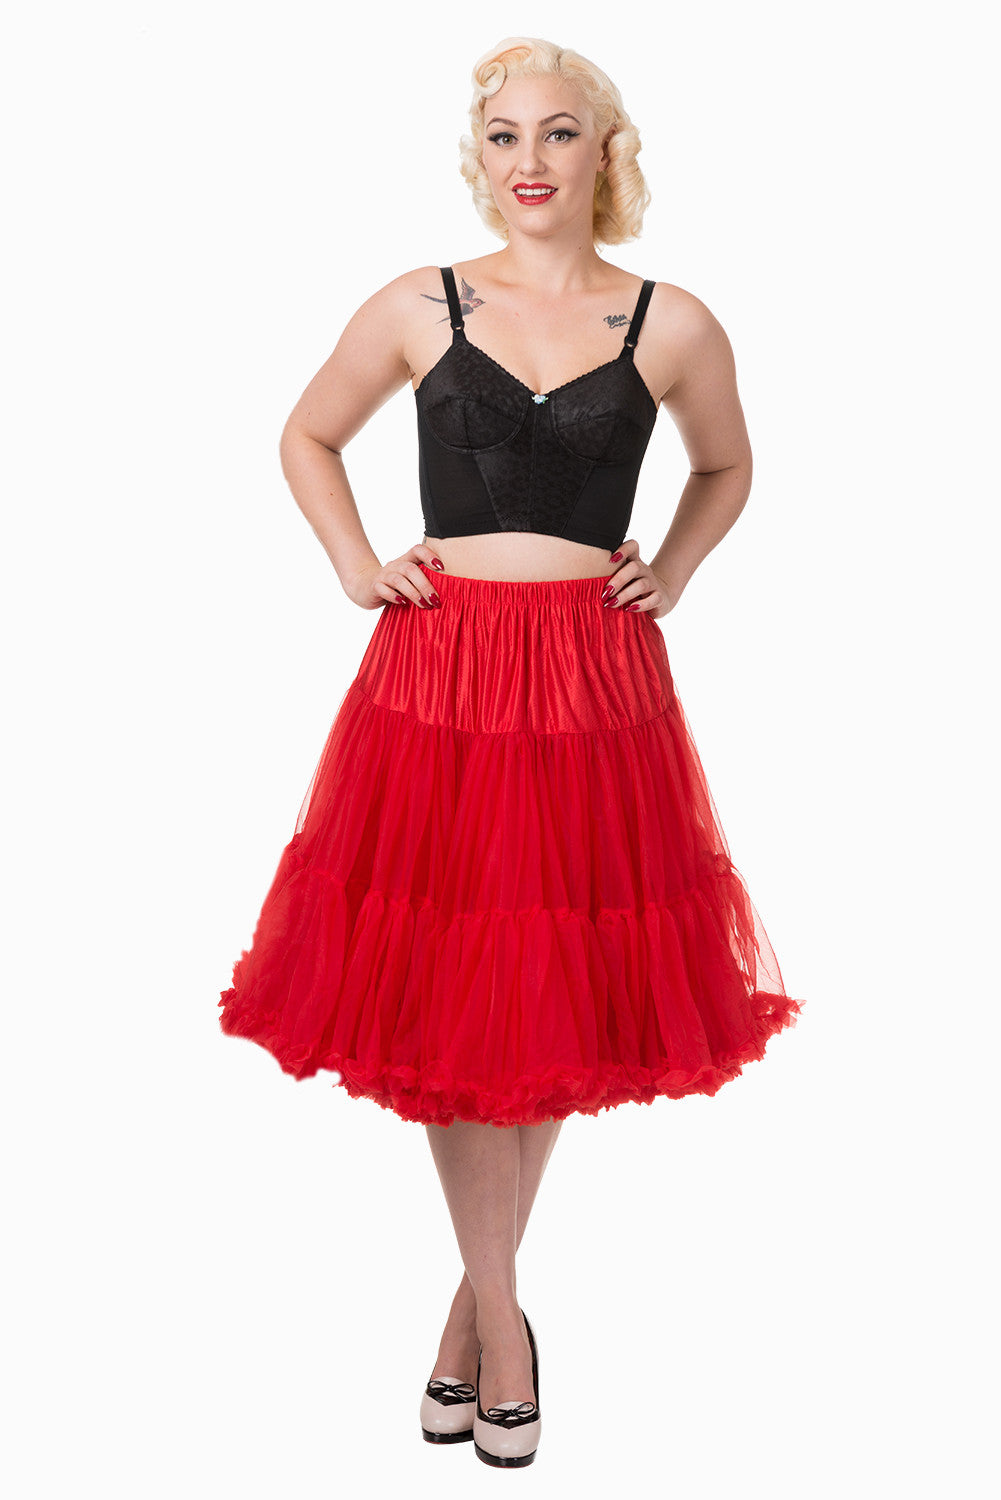 Lifeforms Petticoat in Red